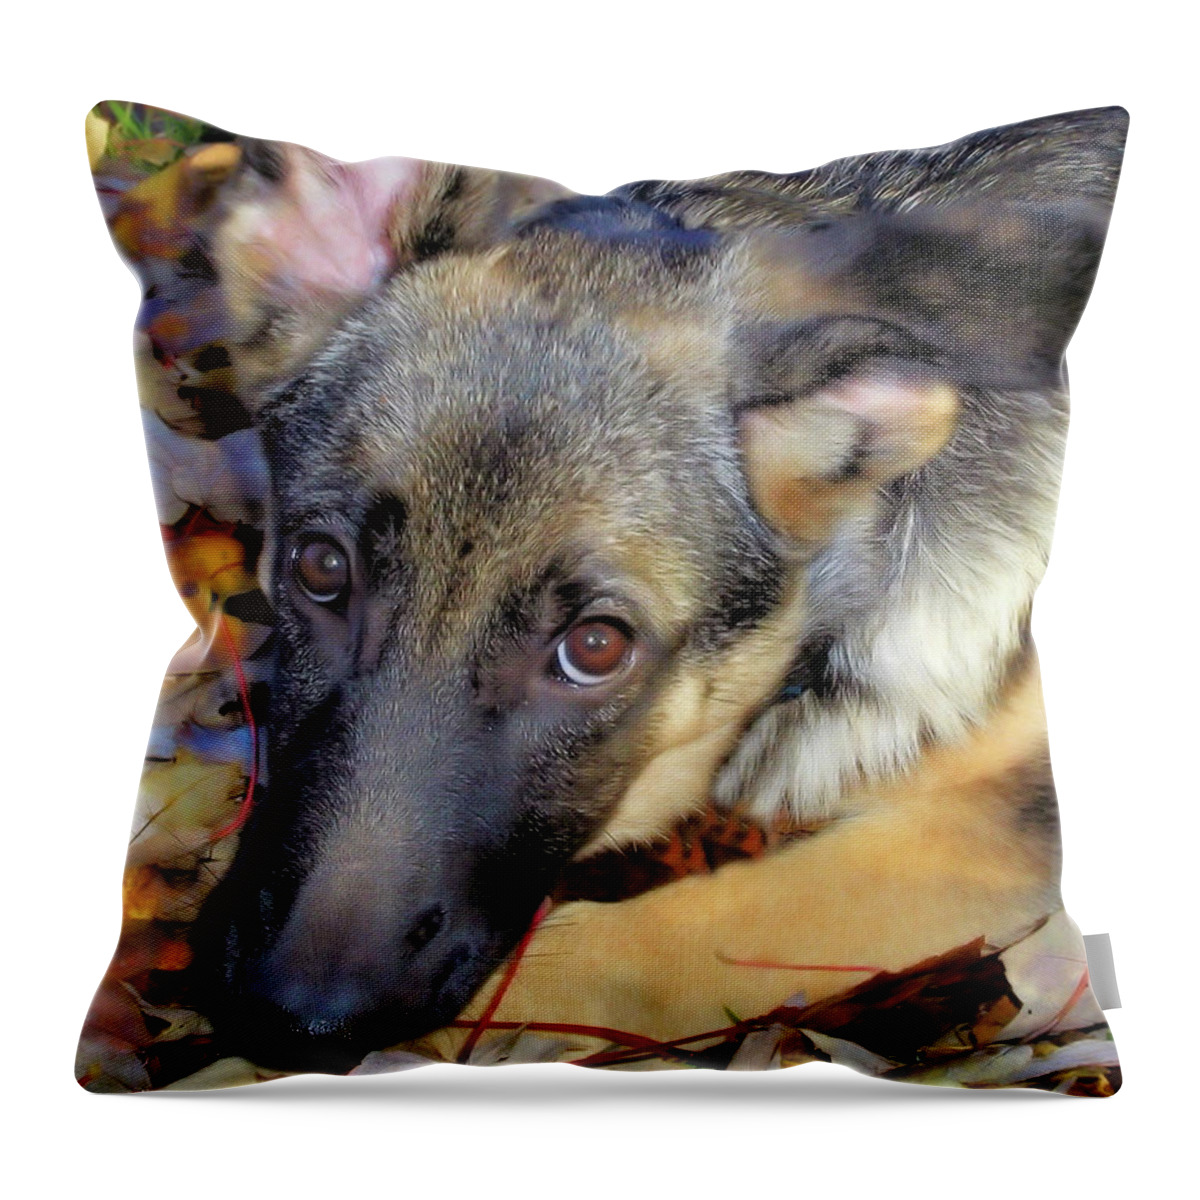 Autumn Throw Pillow featuring the photograph Baron in the Leaves by Karol Livote